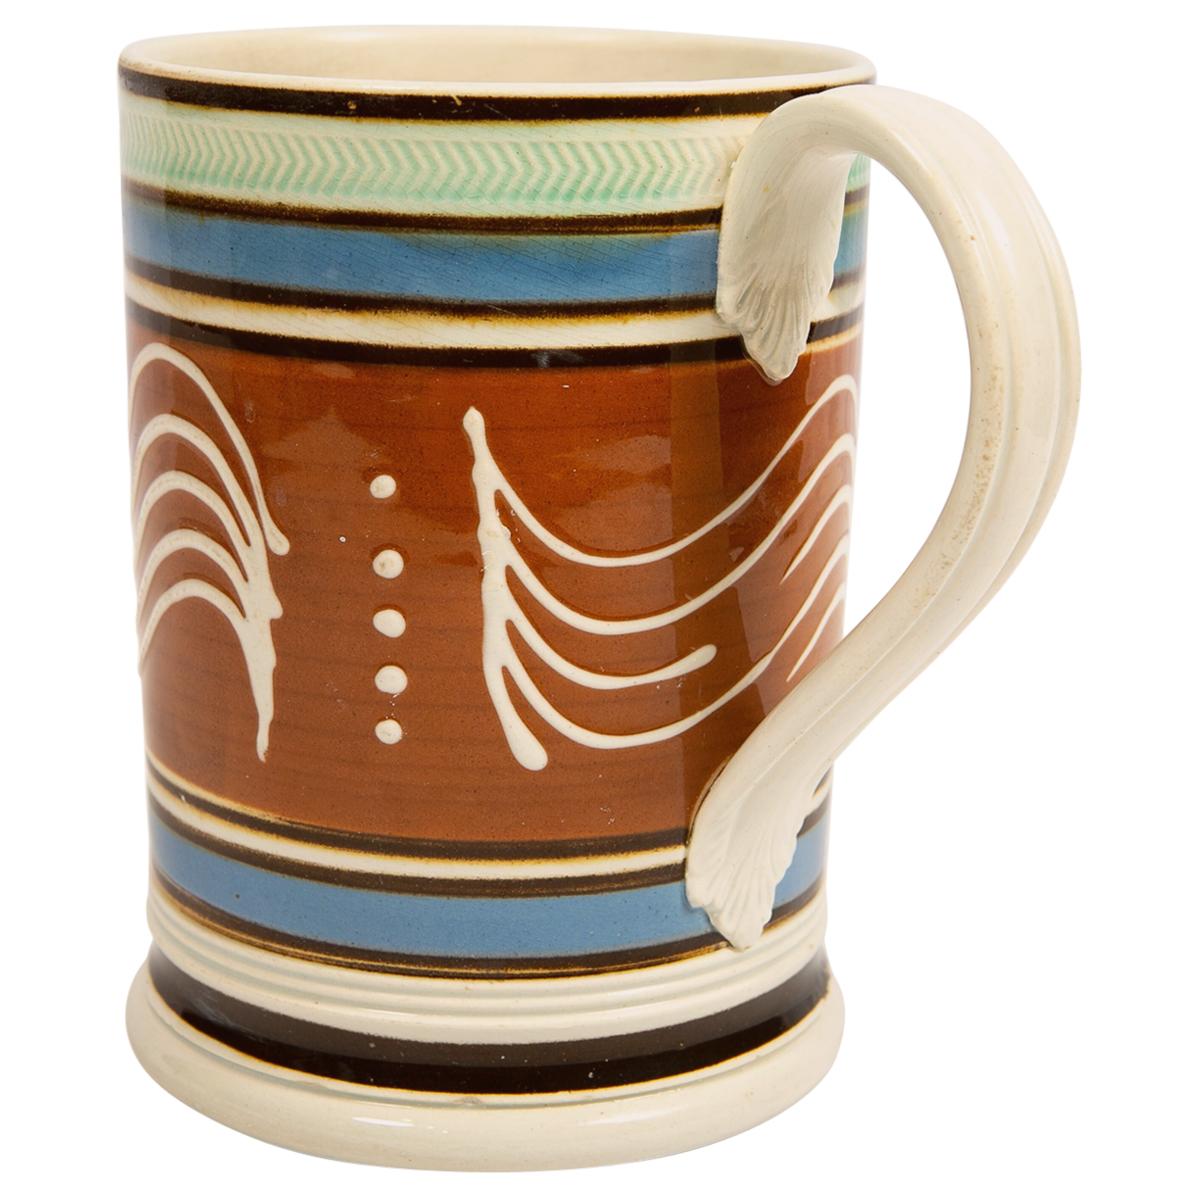 Mochaware Tankard with 5 Quill and Dot Trailed Slip Decoration